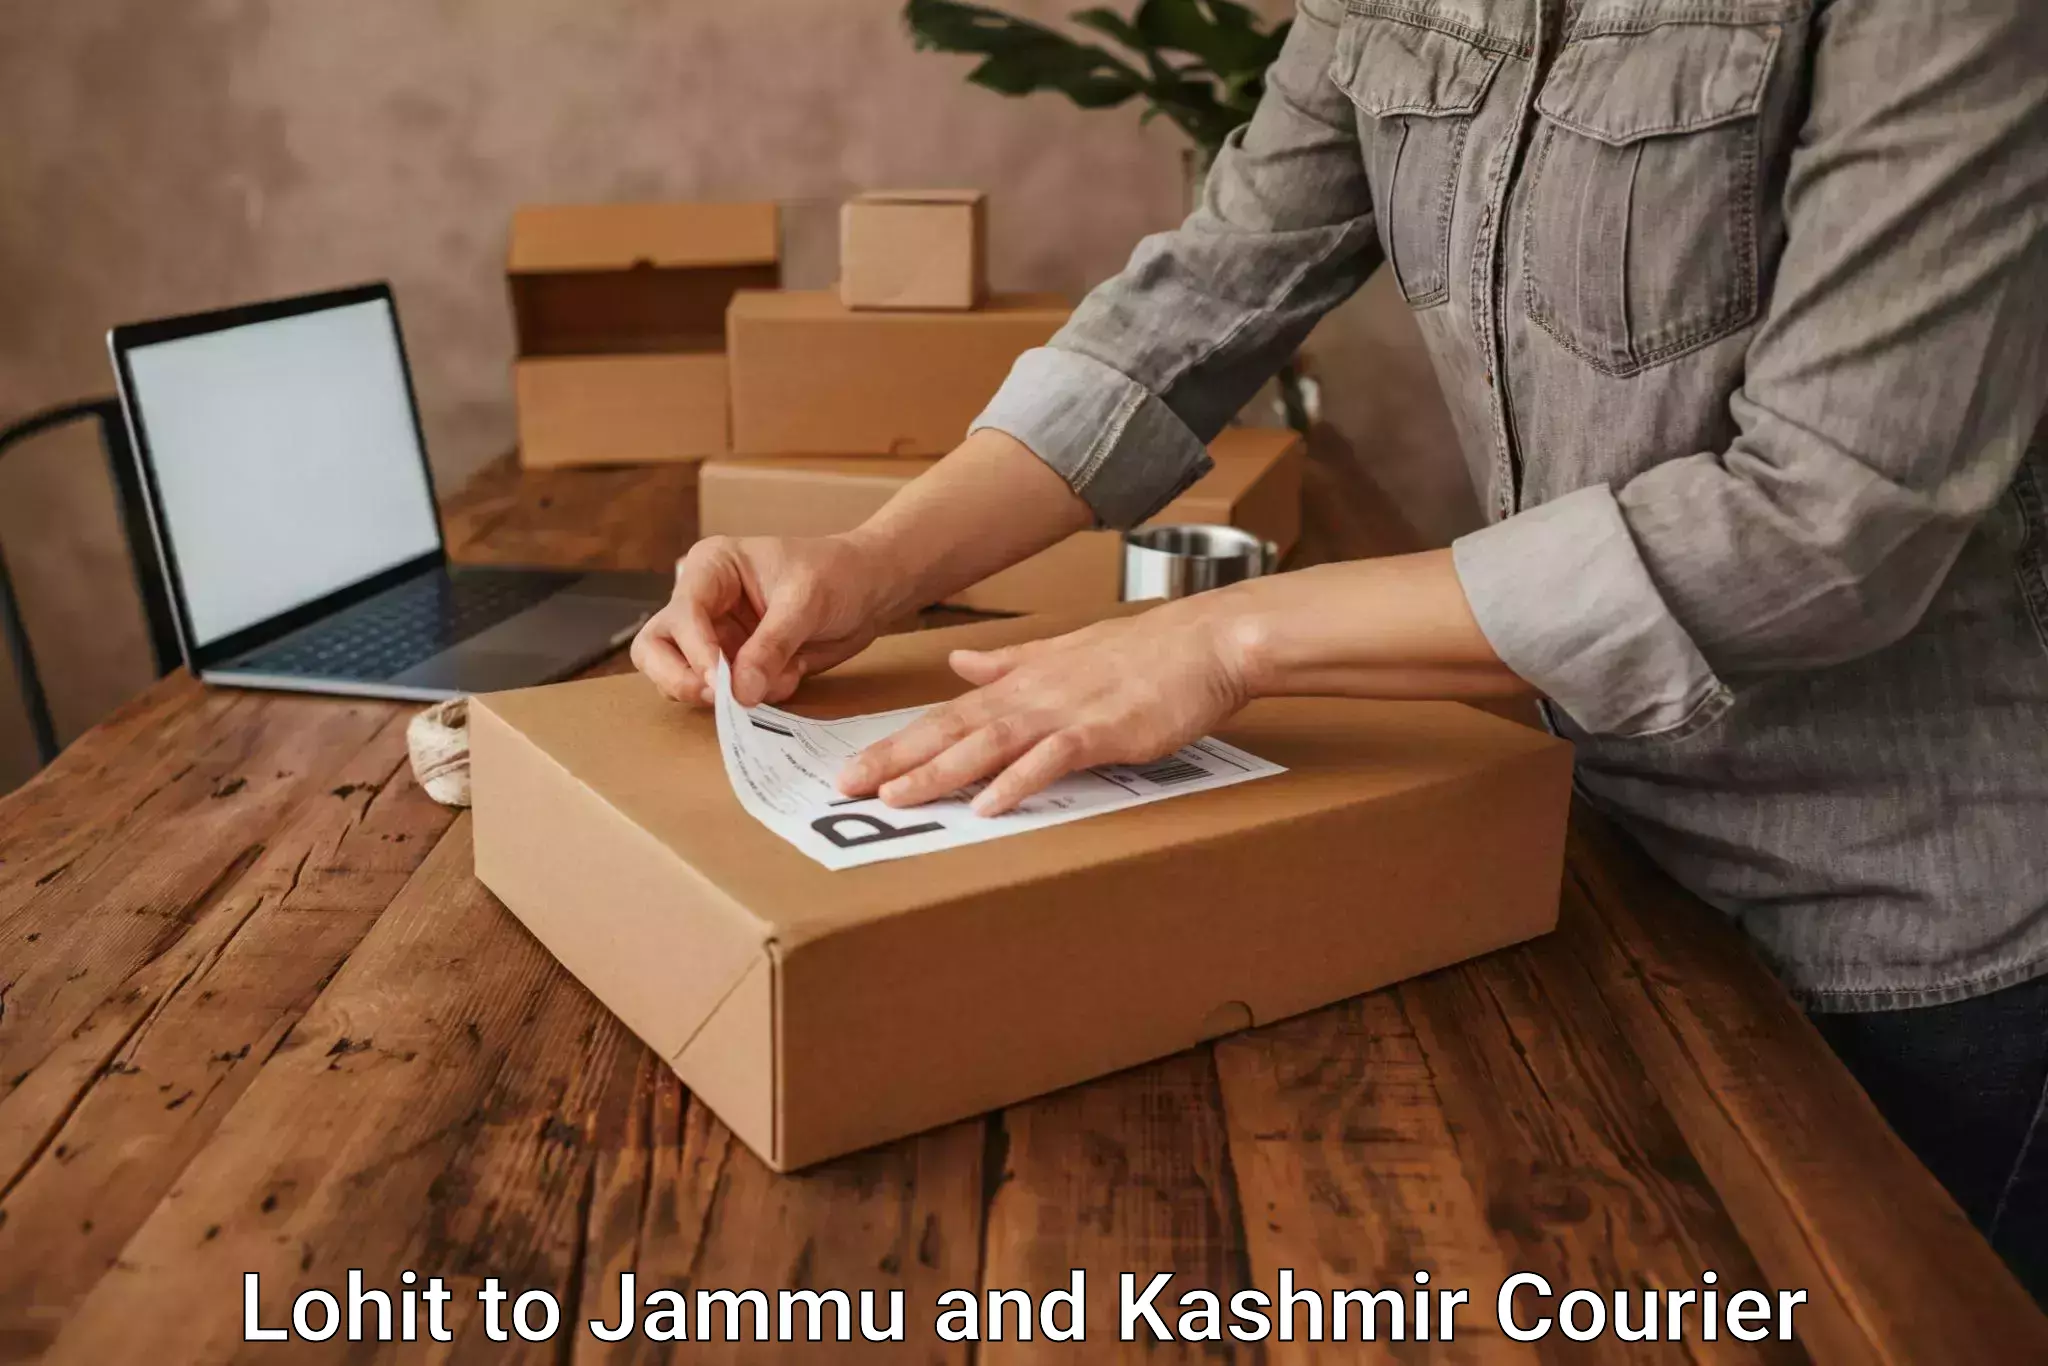 Residential courier service Lohit to Rajouri